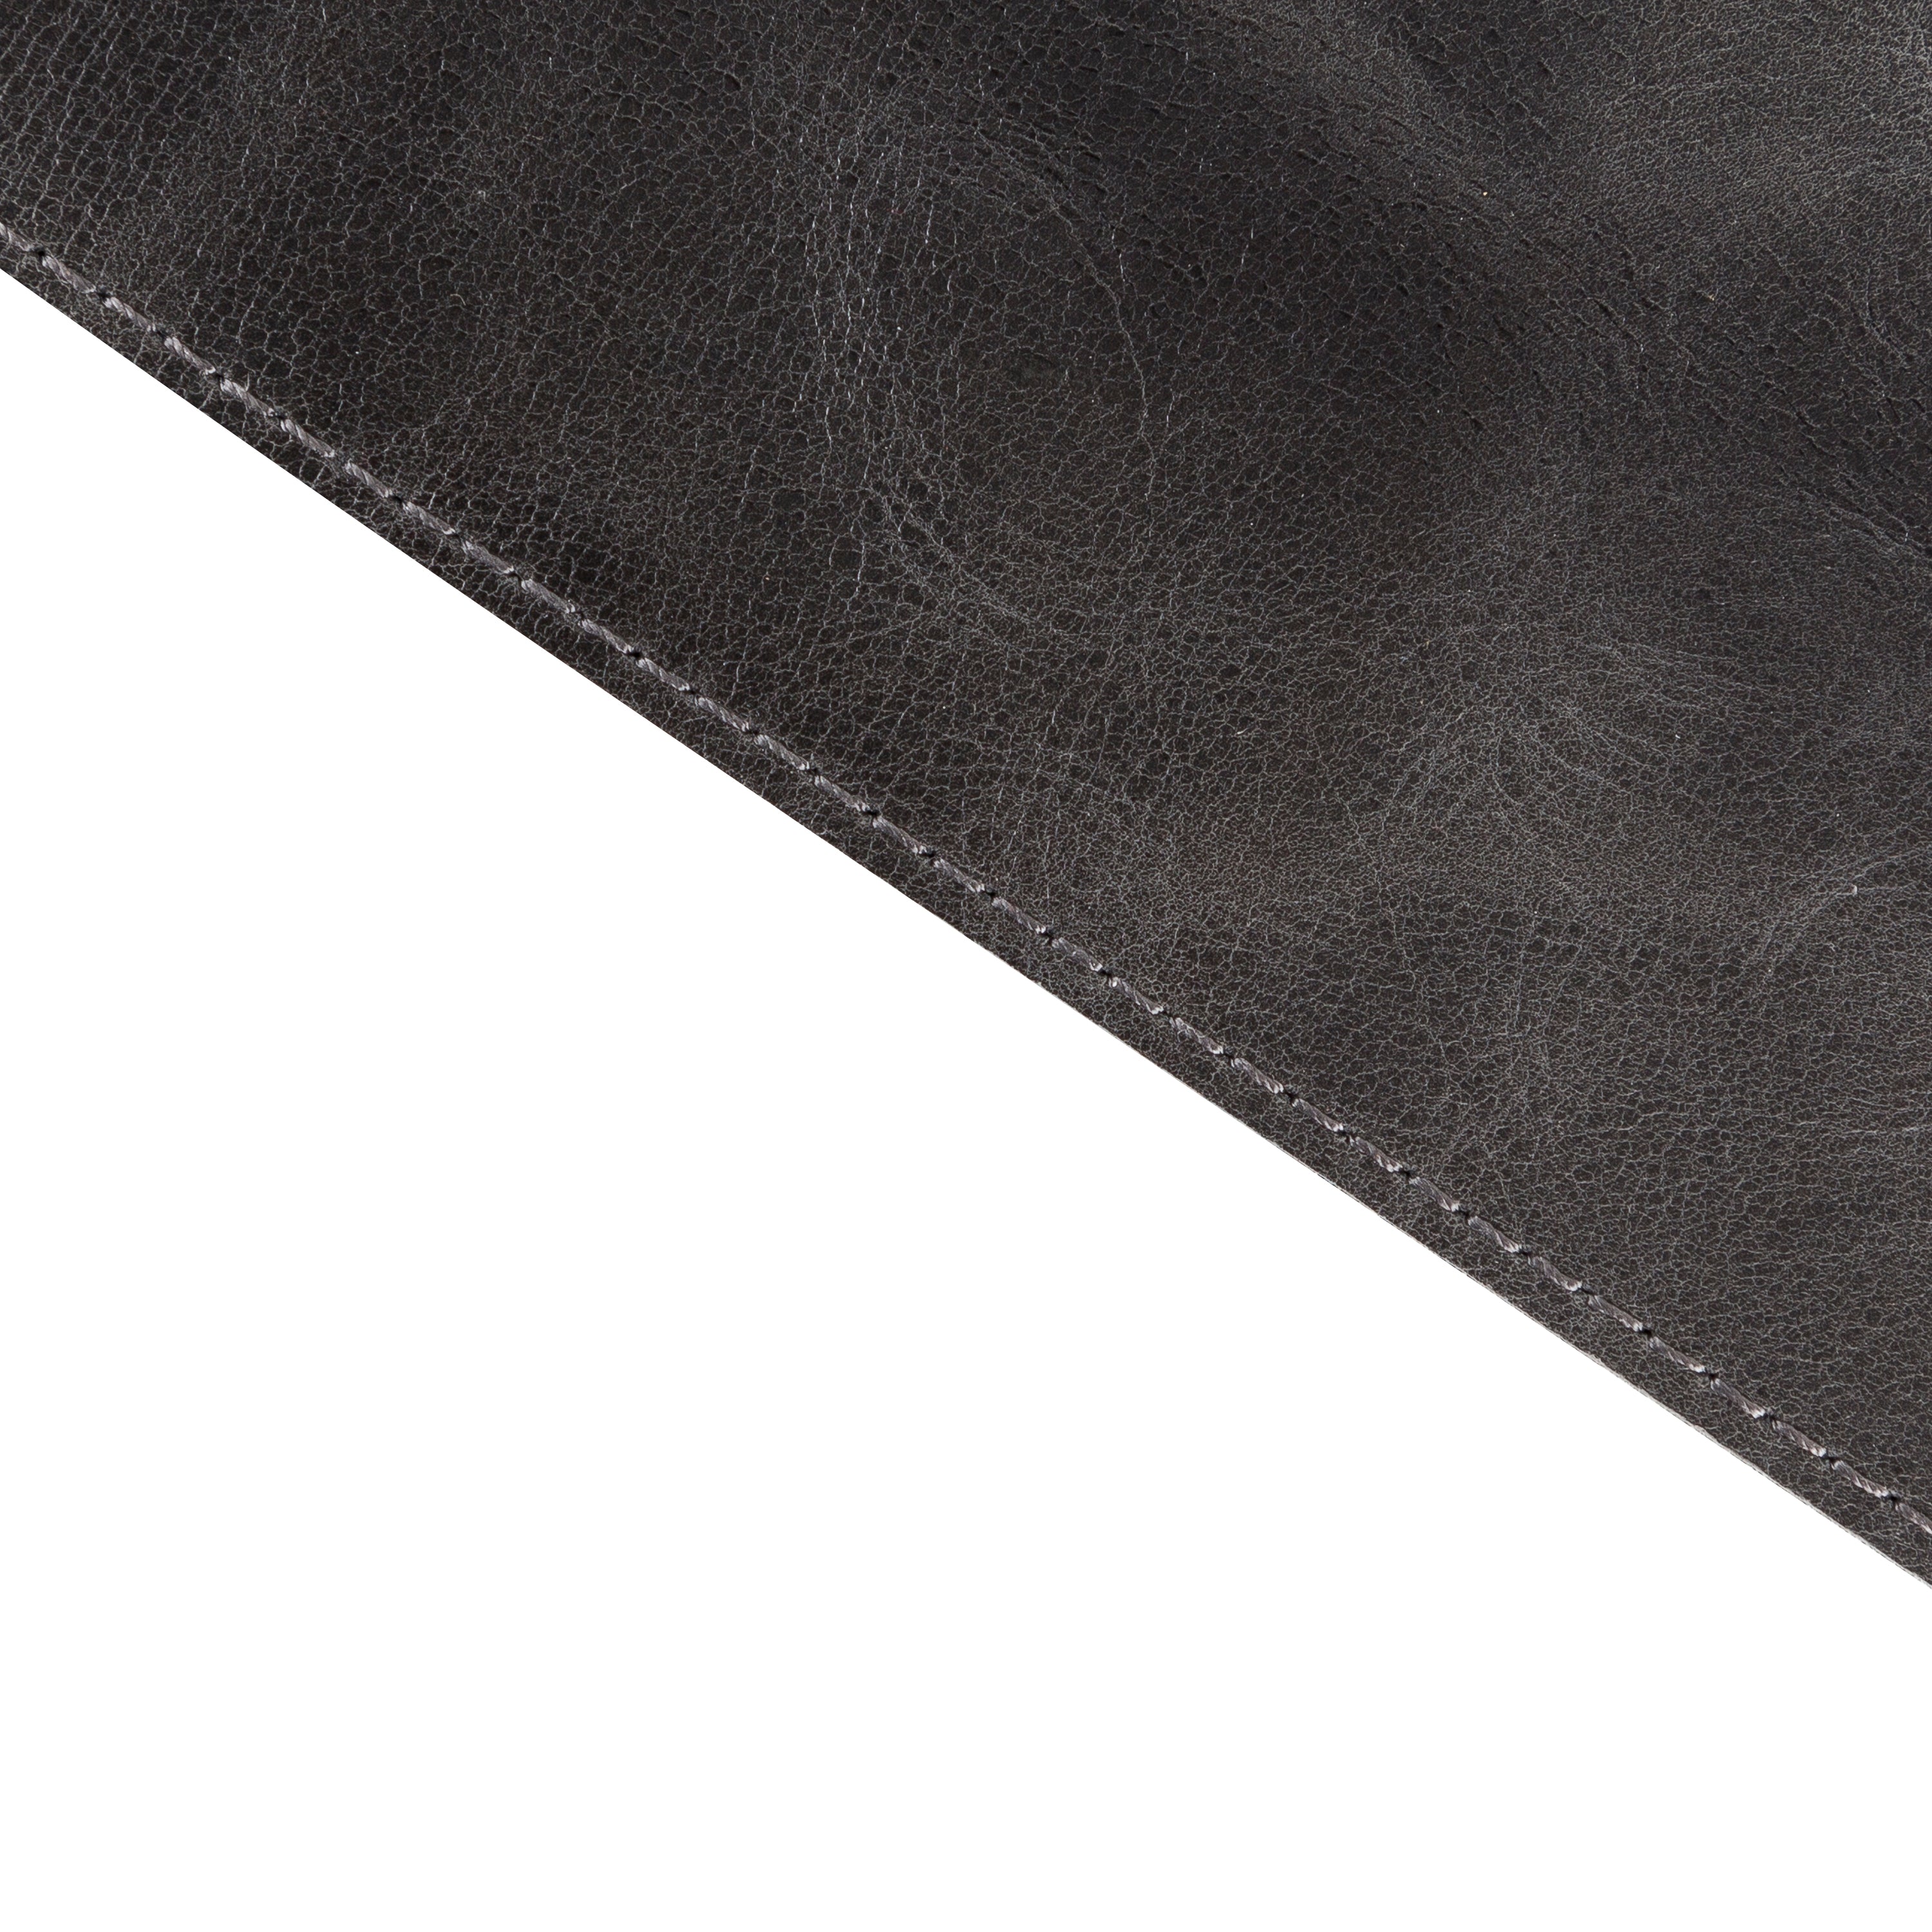 LupinnyLeather Genuine Grey Leather Deskmat, Computer Pad, Office Desk Pad 2